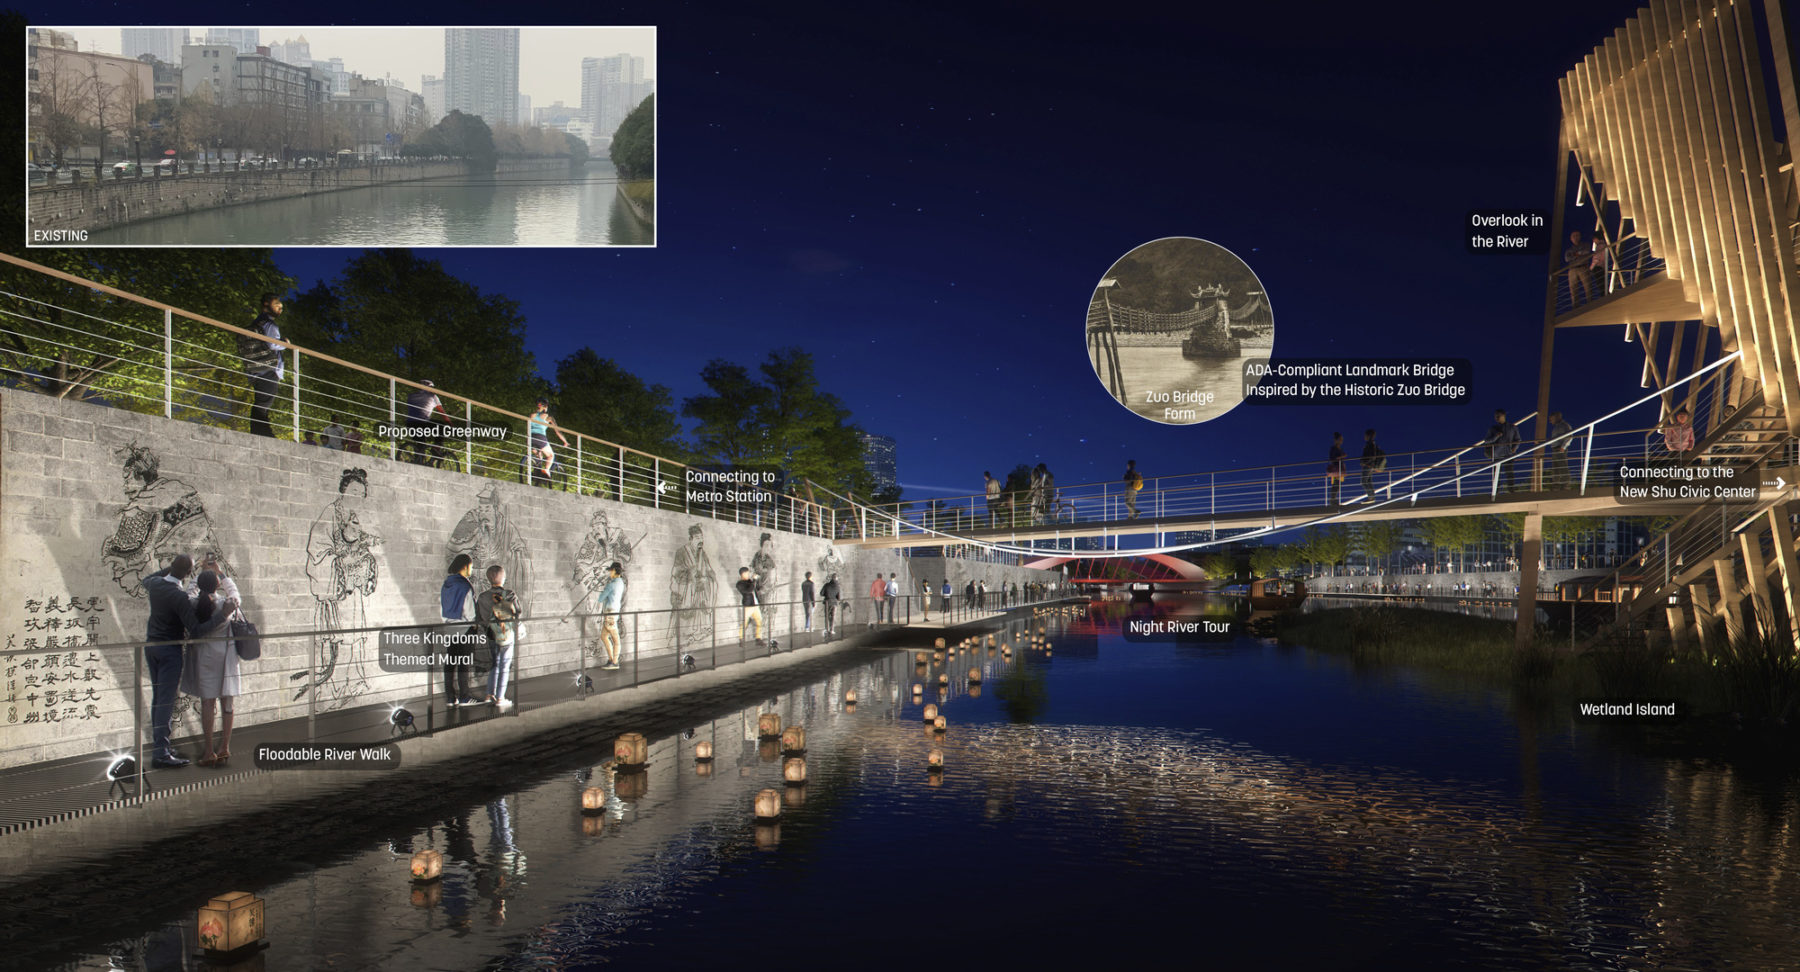 rendering of proposed river condition at night. people walk along the path, lanterns float in the water. in the upper left cornering is an inset picture of the existing conditions